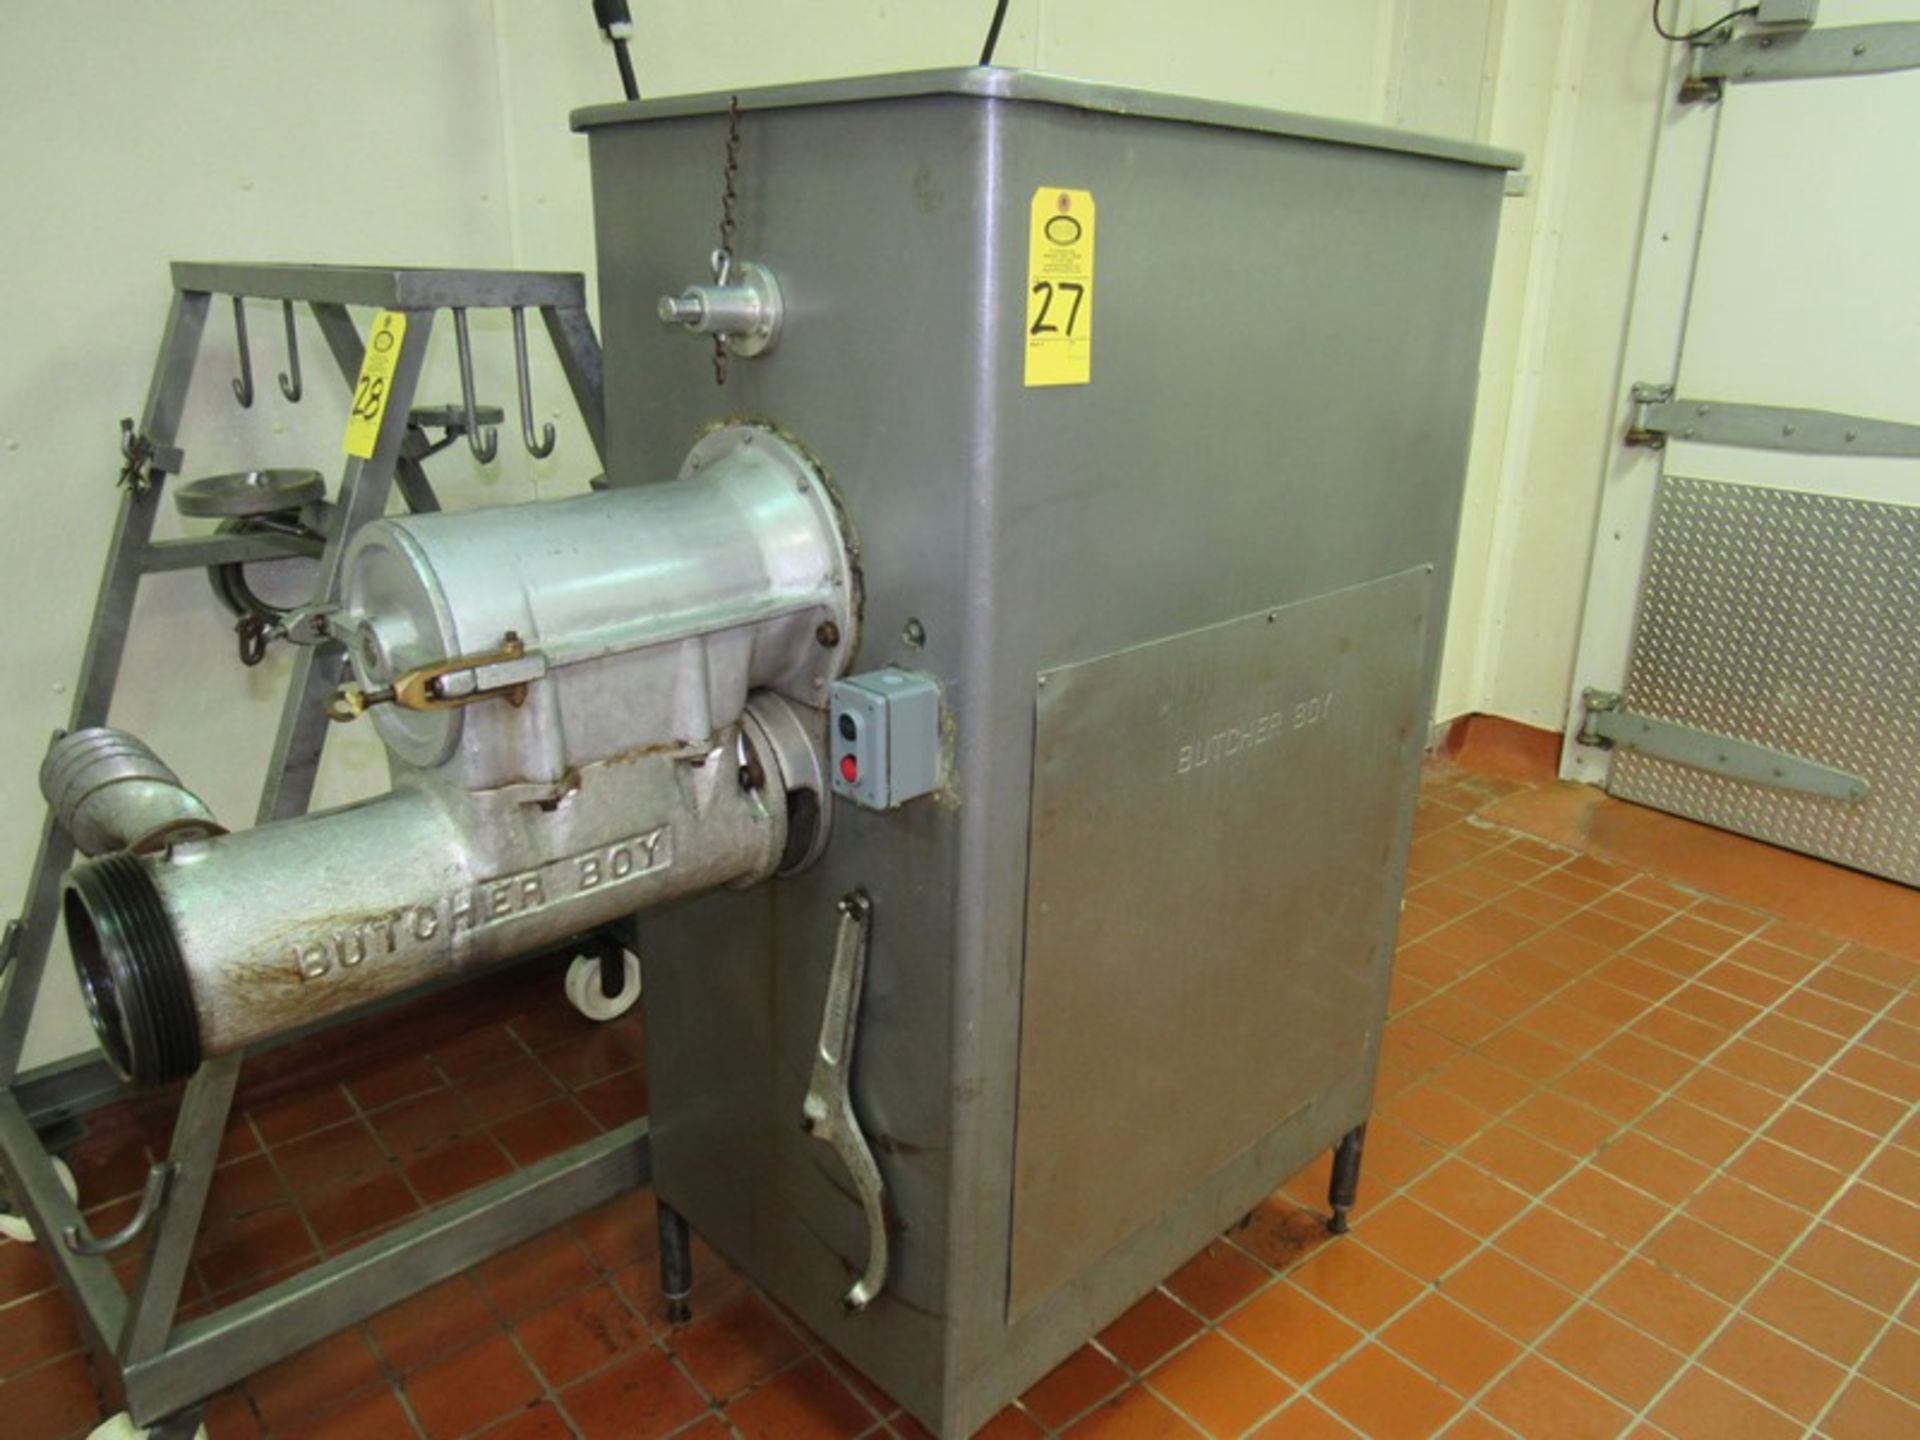 Butcher Boy Mdl. AU56 Grinder, 6" head, top agitation, 220 volts, 3 phase, with (2) plates and